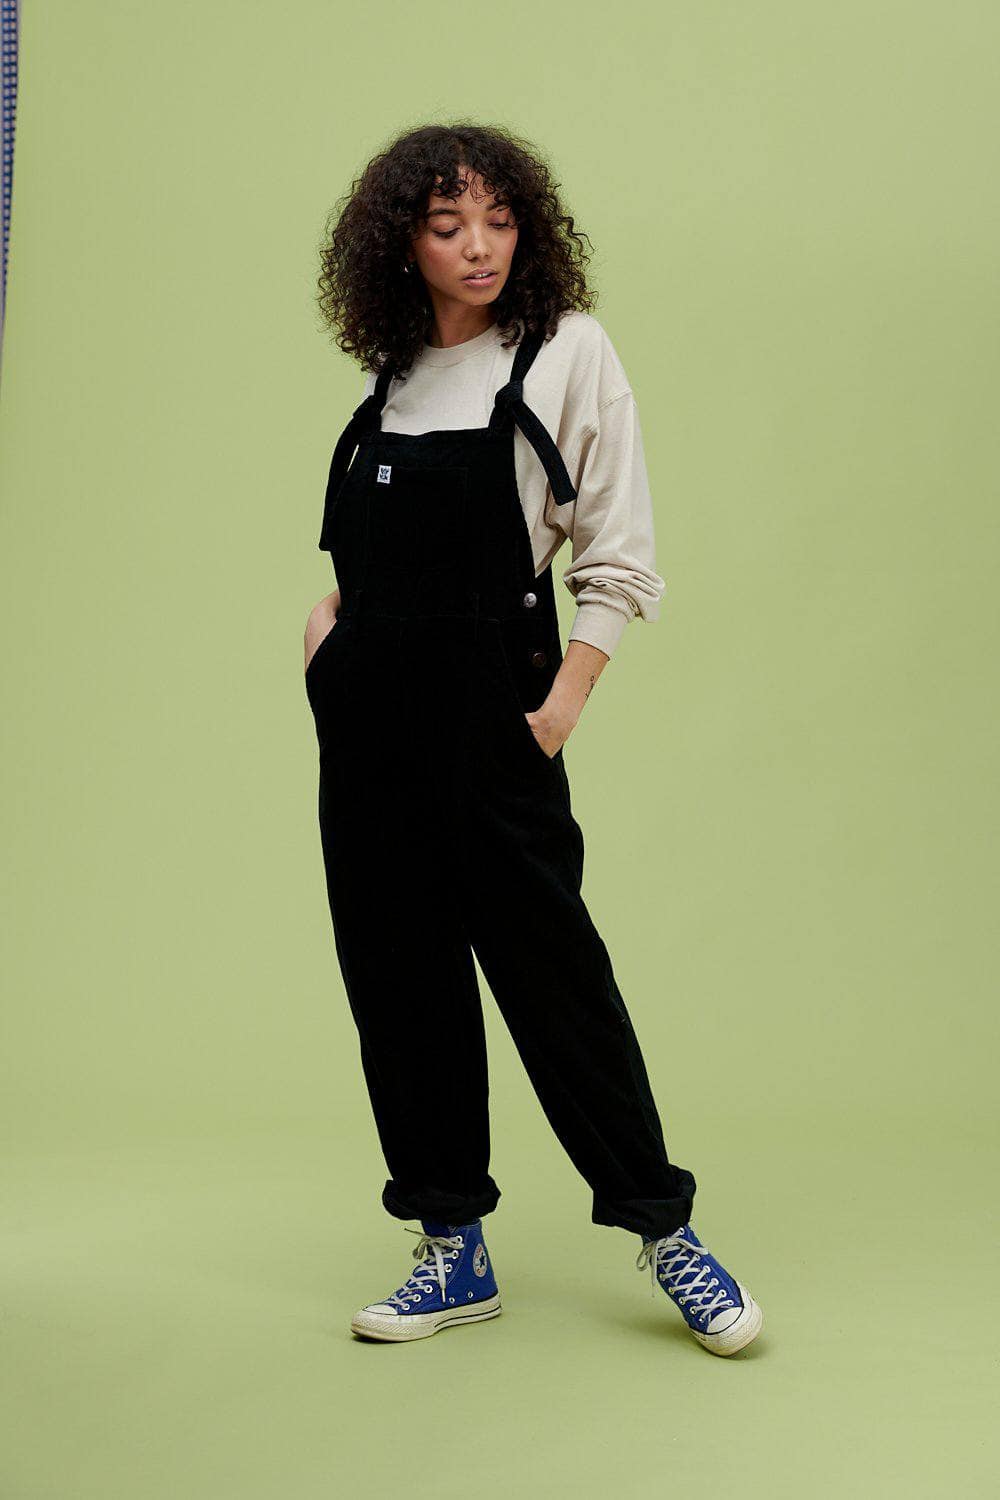 lucy and yak dungarees